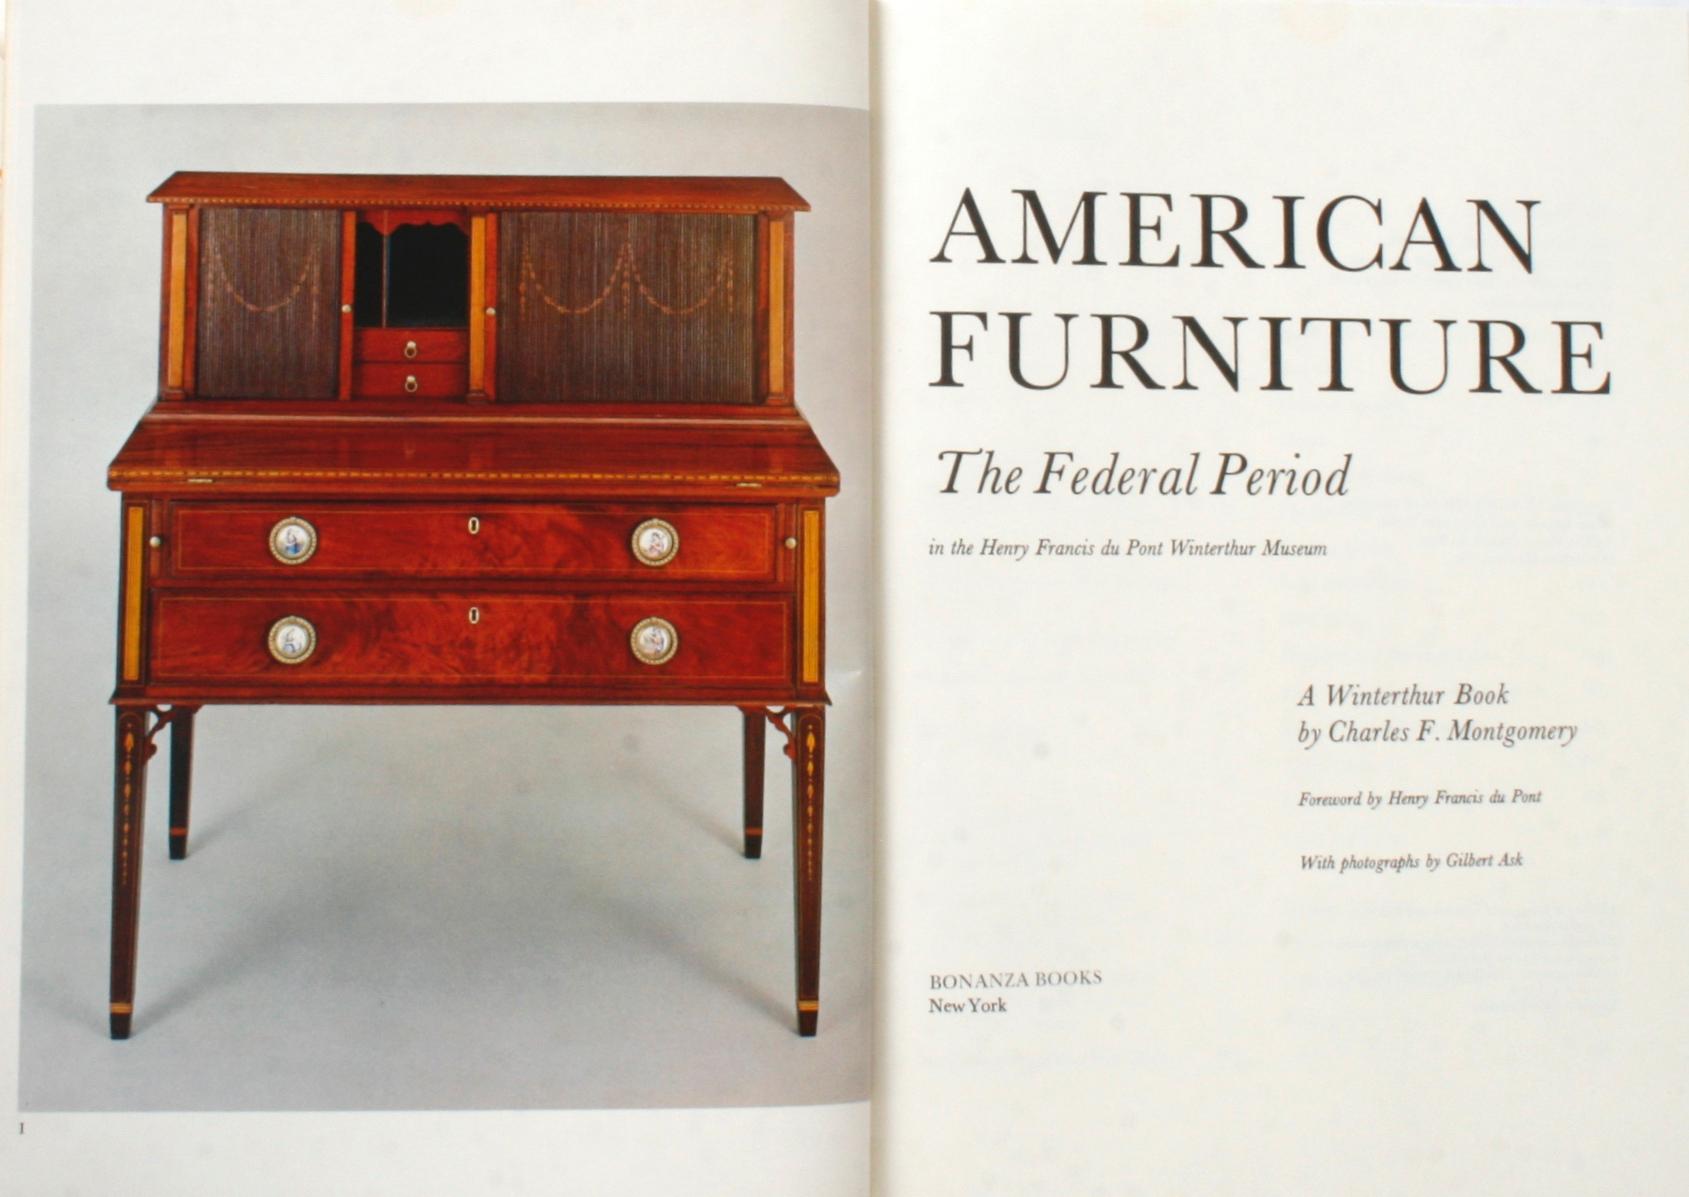 American Furniture, the Federal Period by Charles F. Montgomery. New York: Crown Publishing, 1978. Hardcover with dust jacket. 496 pp. A large reference book on American federal period furniture (1788-1825) in the Henry Francis du Pont Winterthur